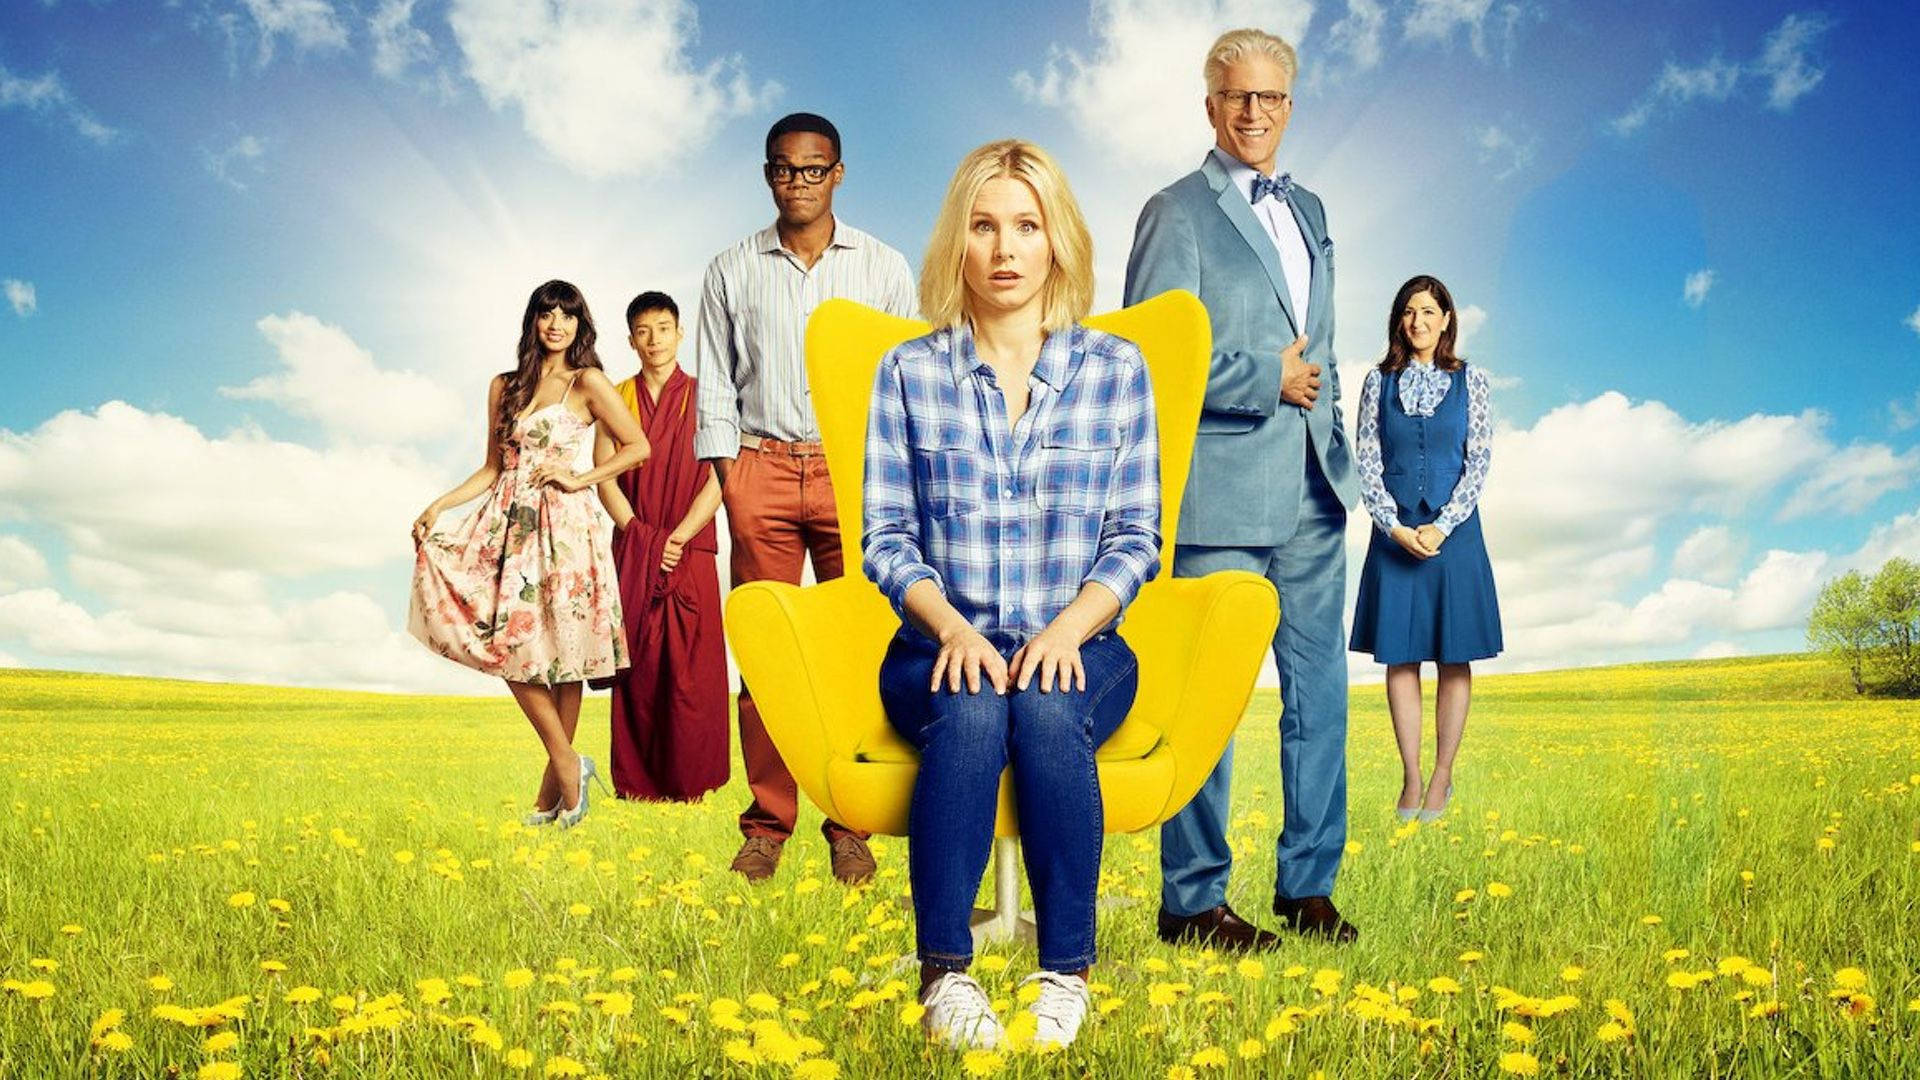 The Good Place Series Poster